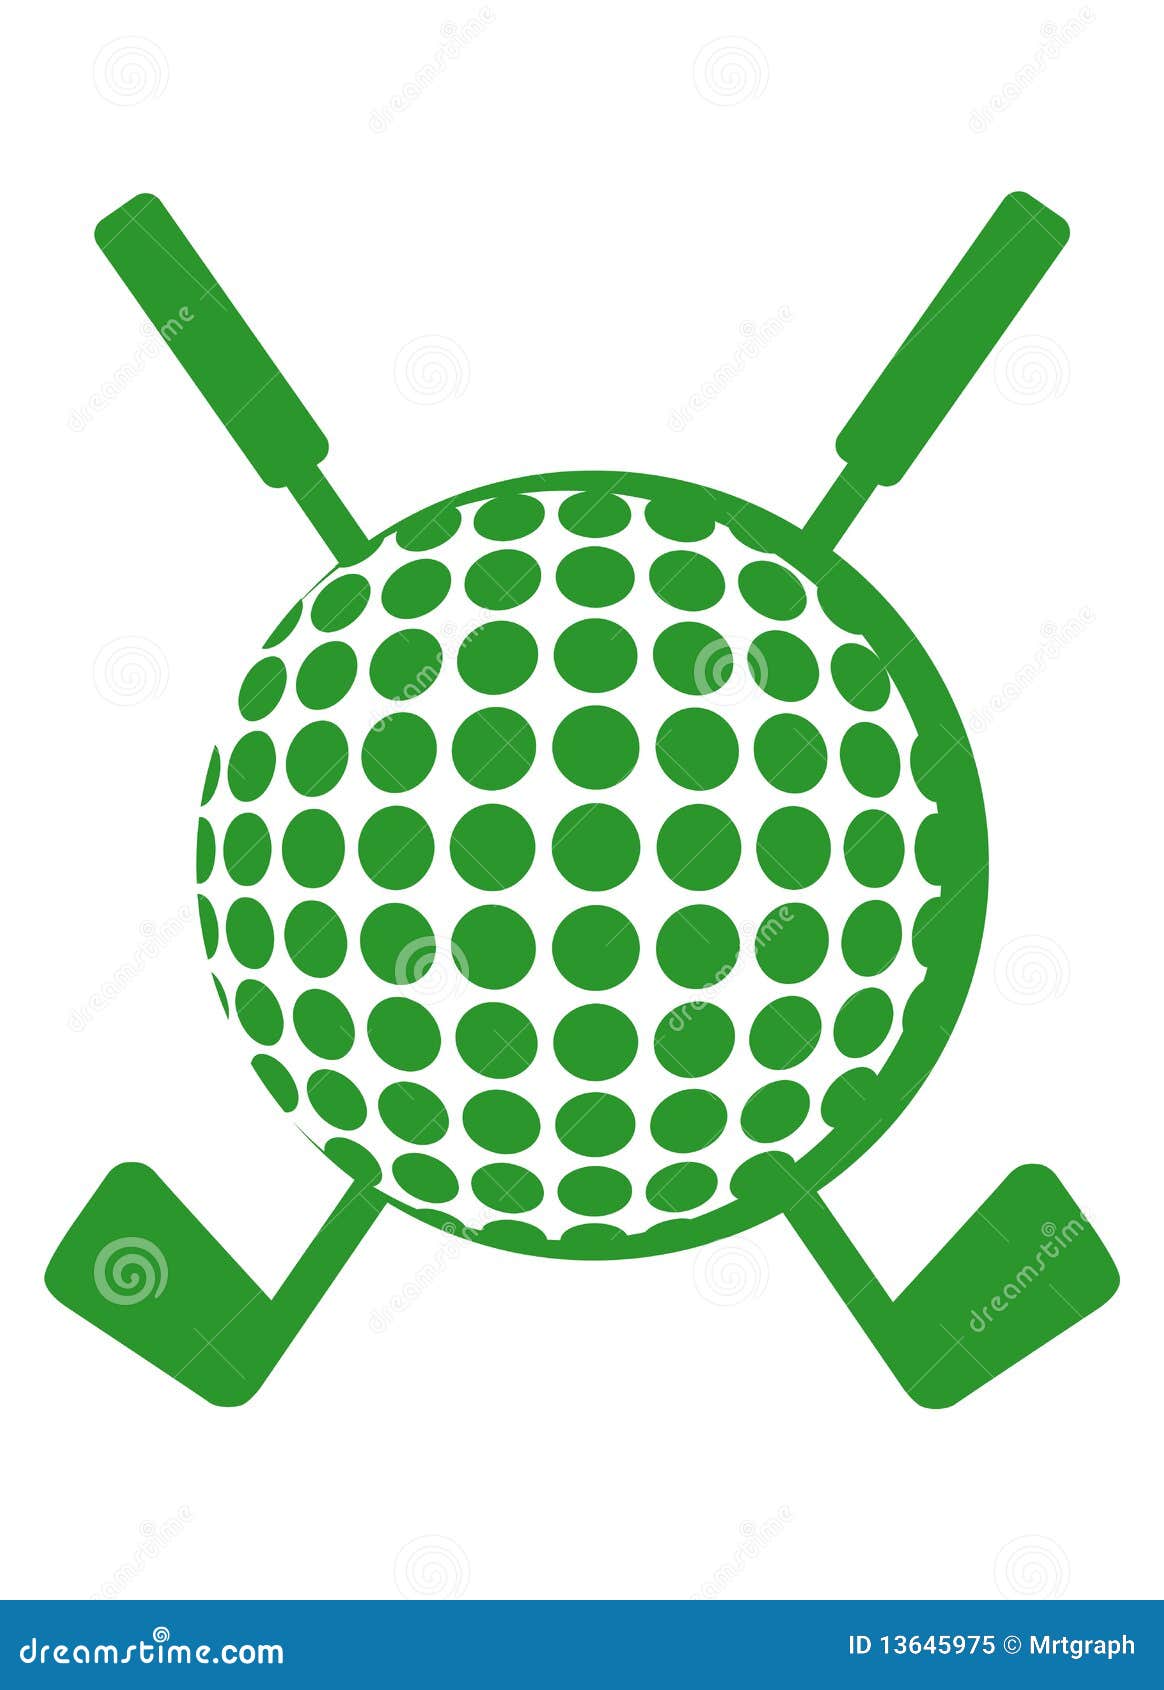 free crossed golf clubs clip art - photo #27